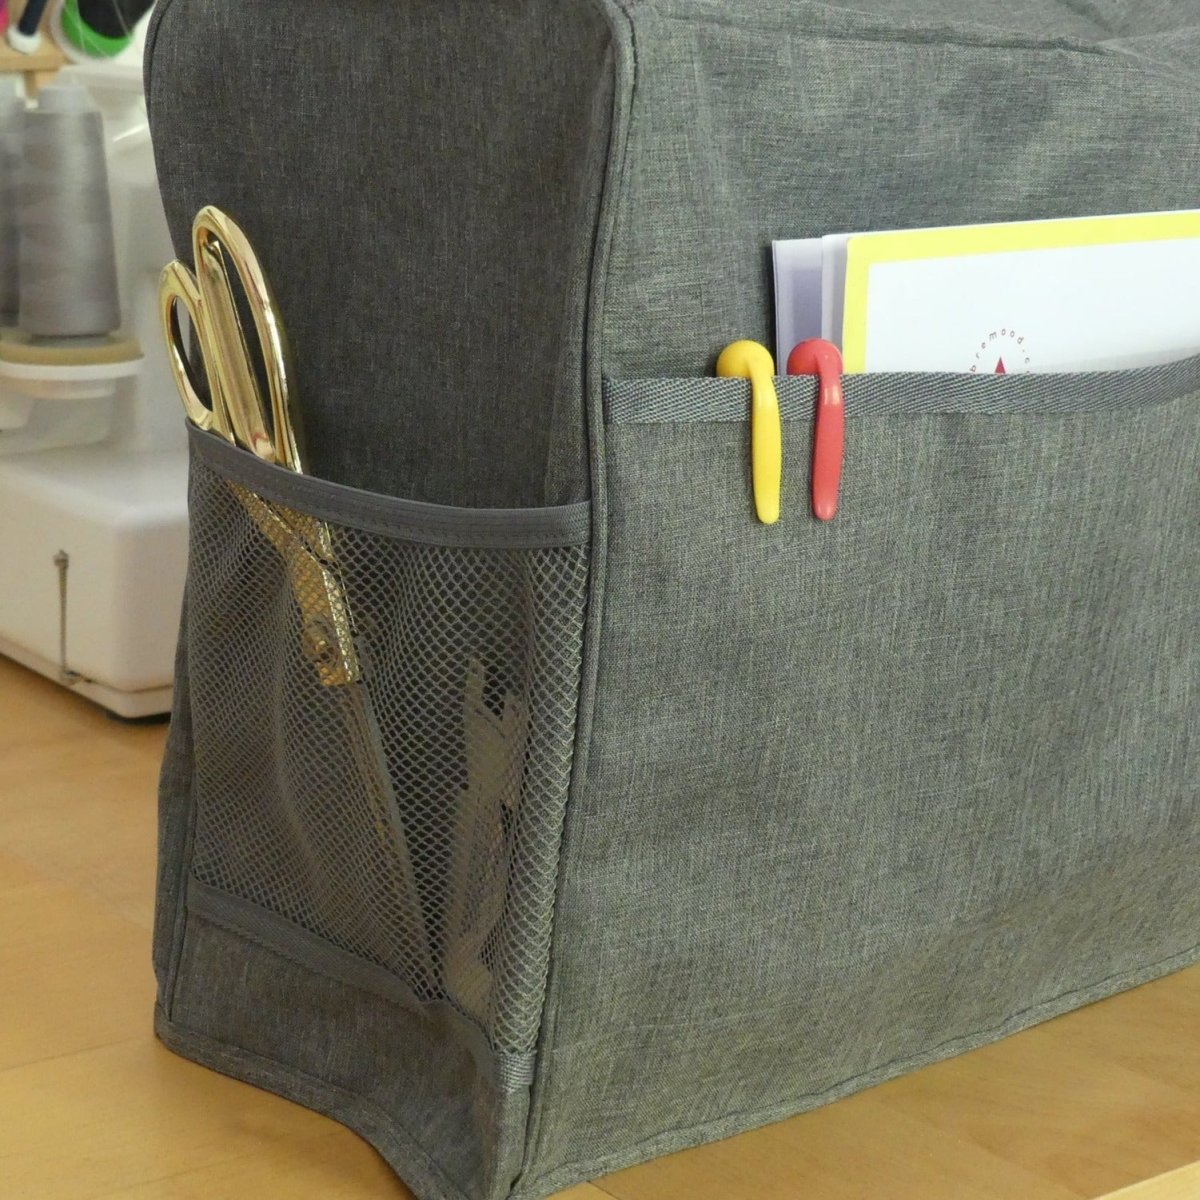 Dust Cover for Sewing Machine with Storage Pockets Accessories